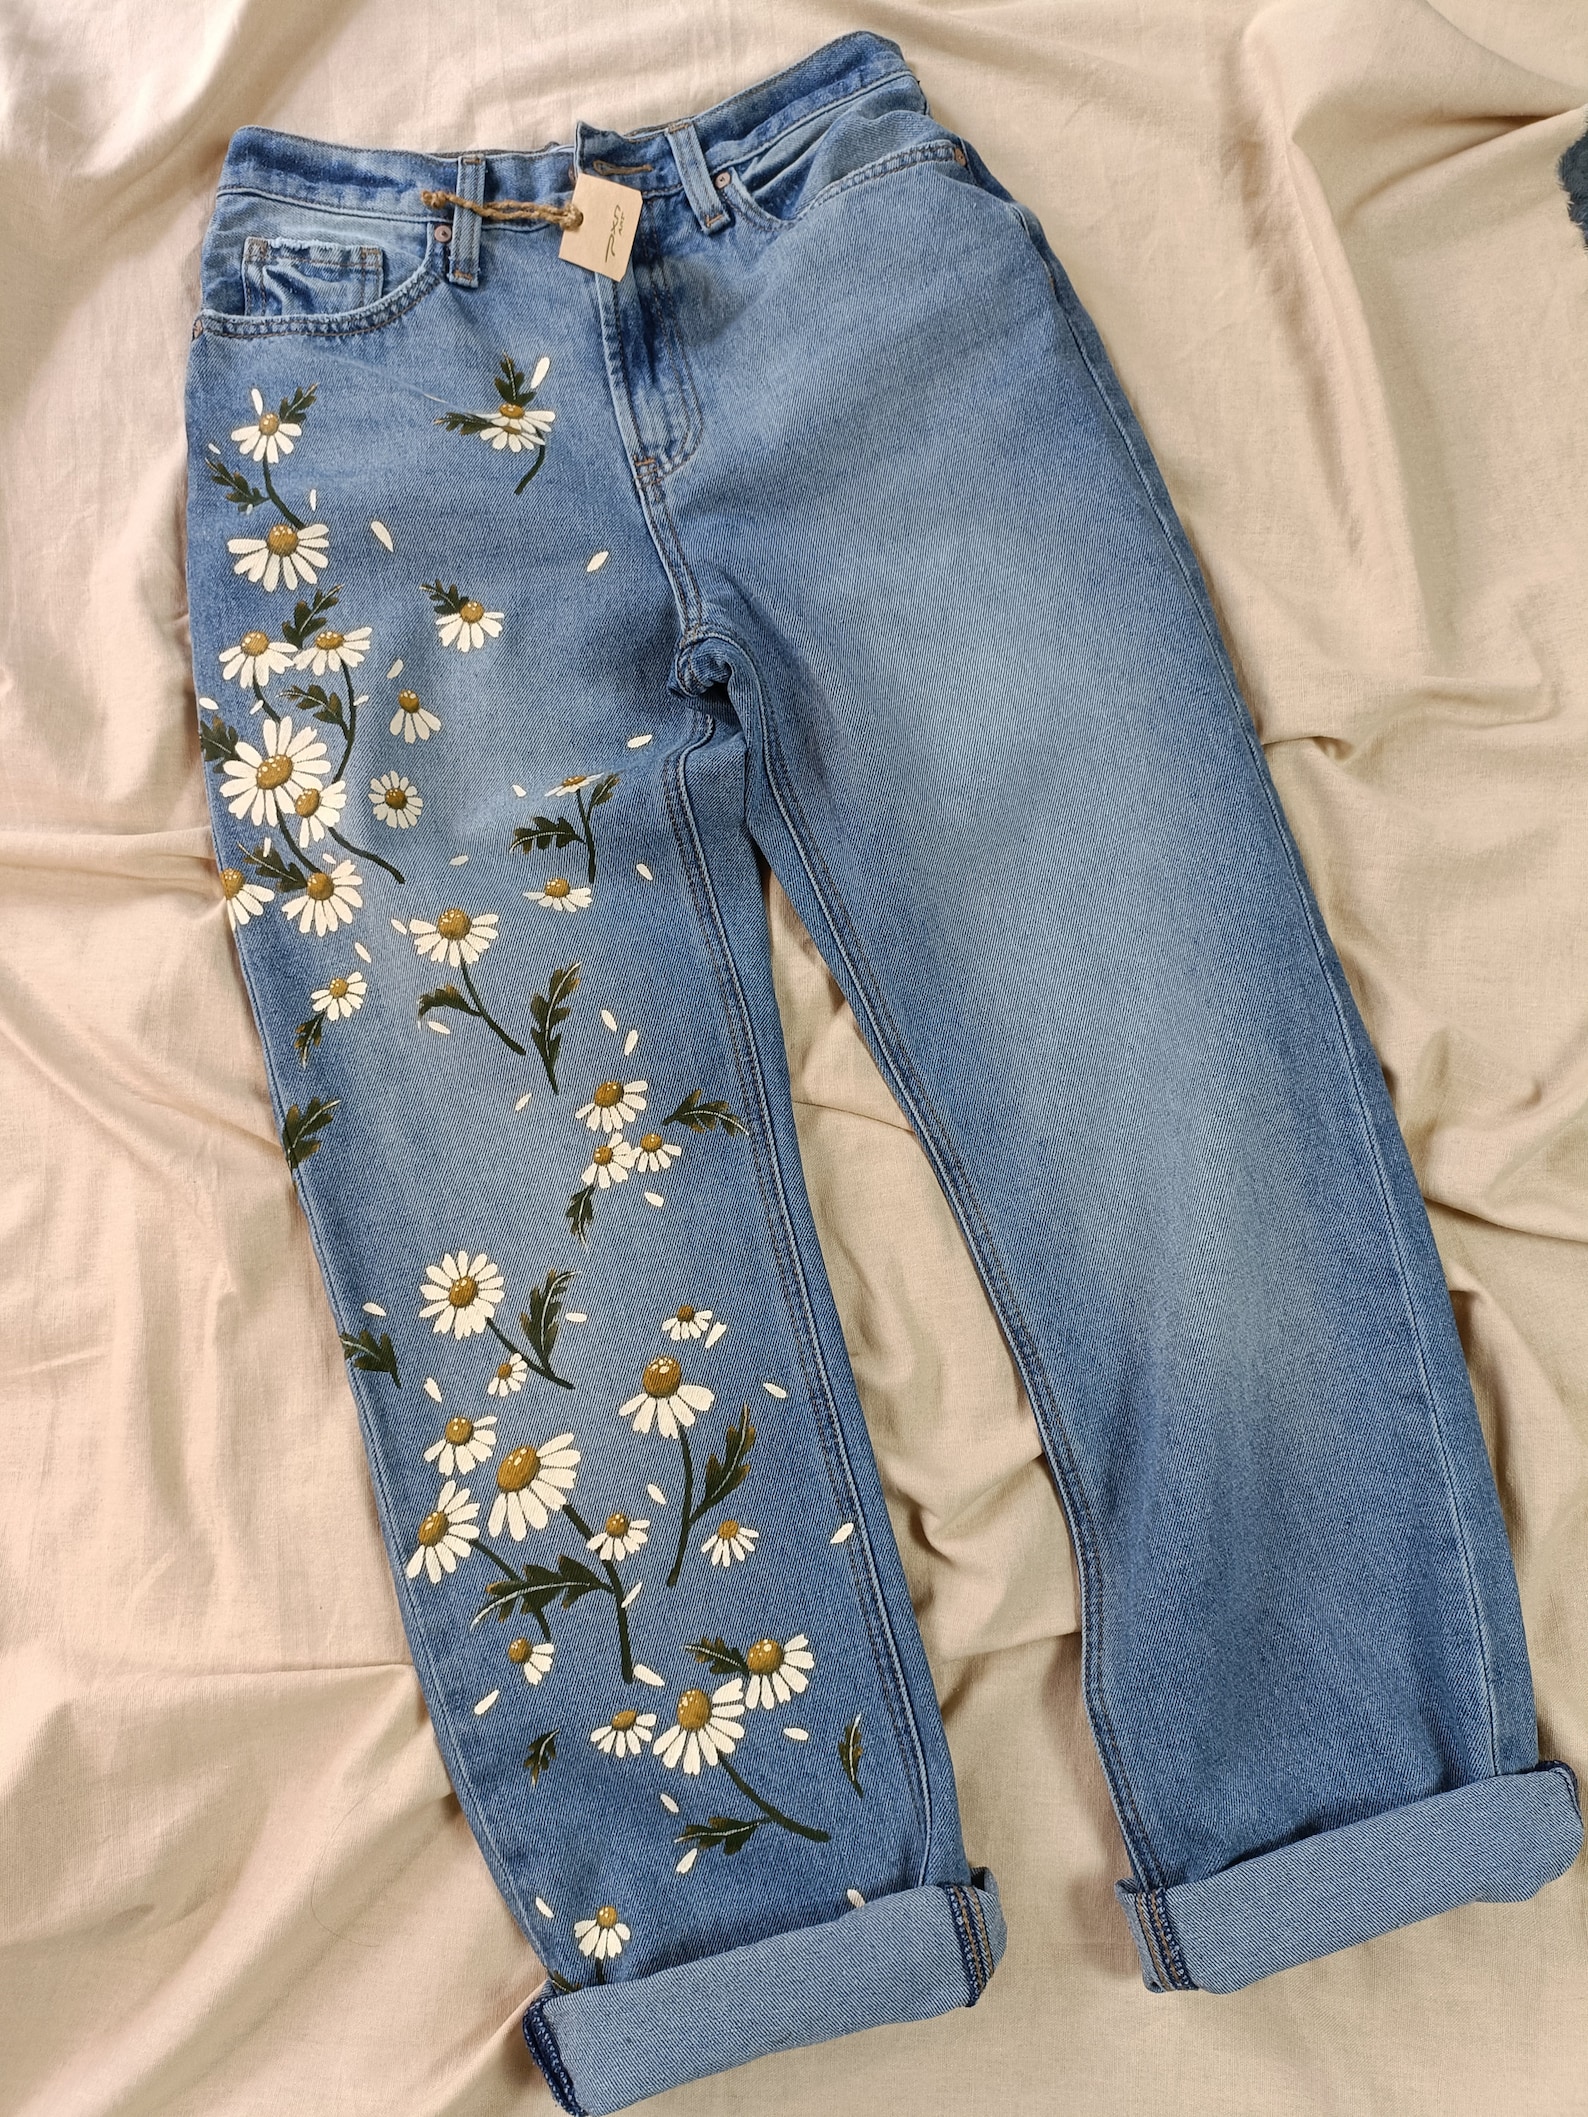 Painted Jeans Daisy Floral Painted Denim Be Amazing - Etsy